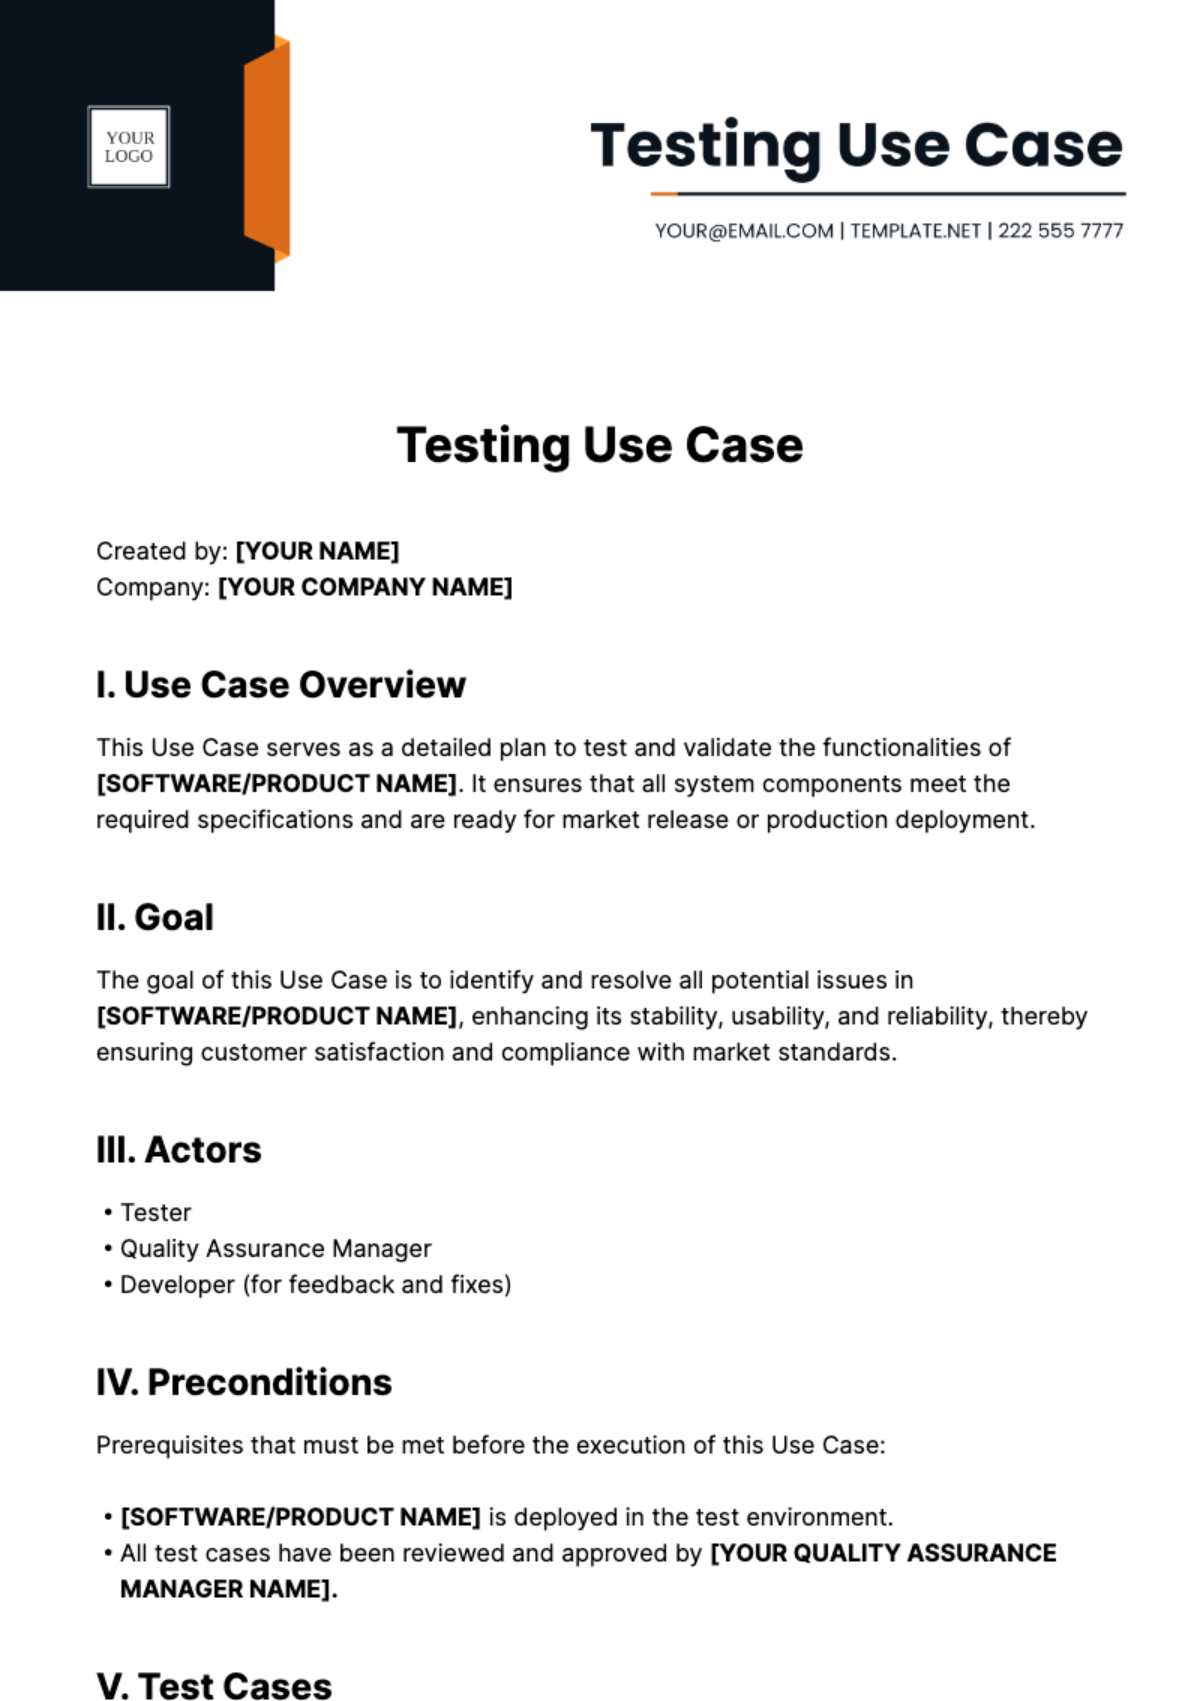 Testing Use Case Template